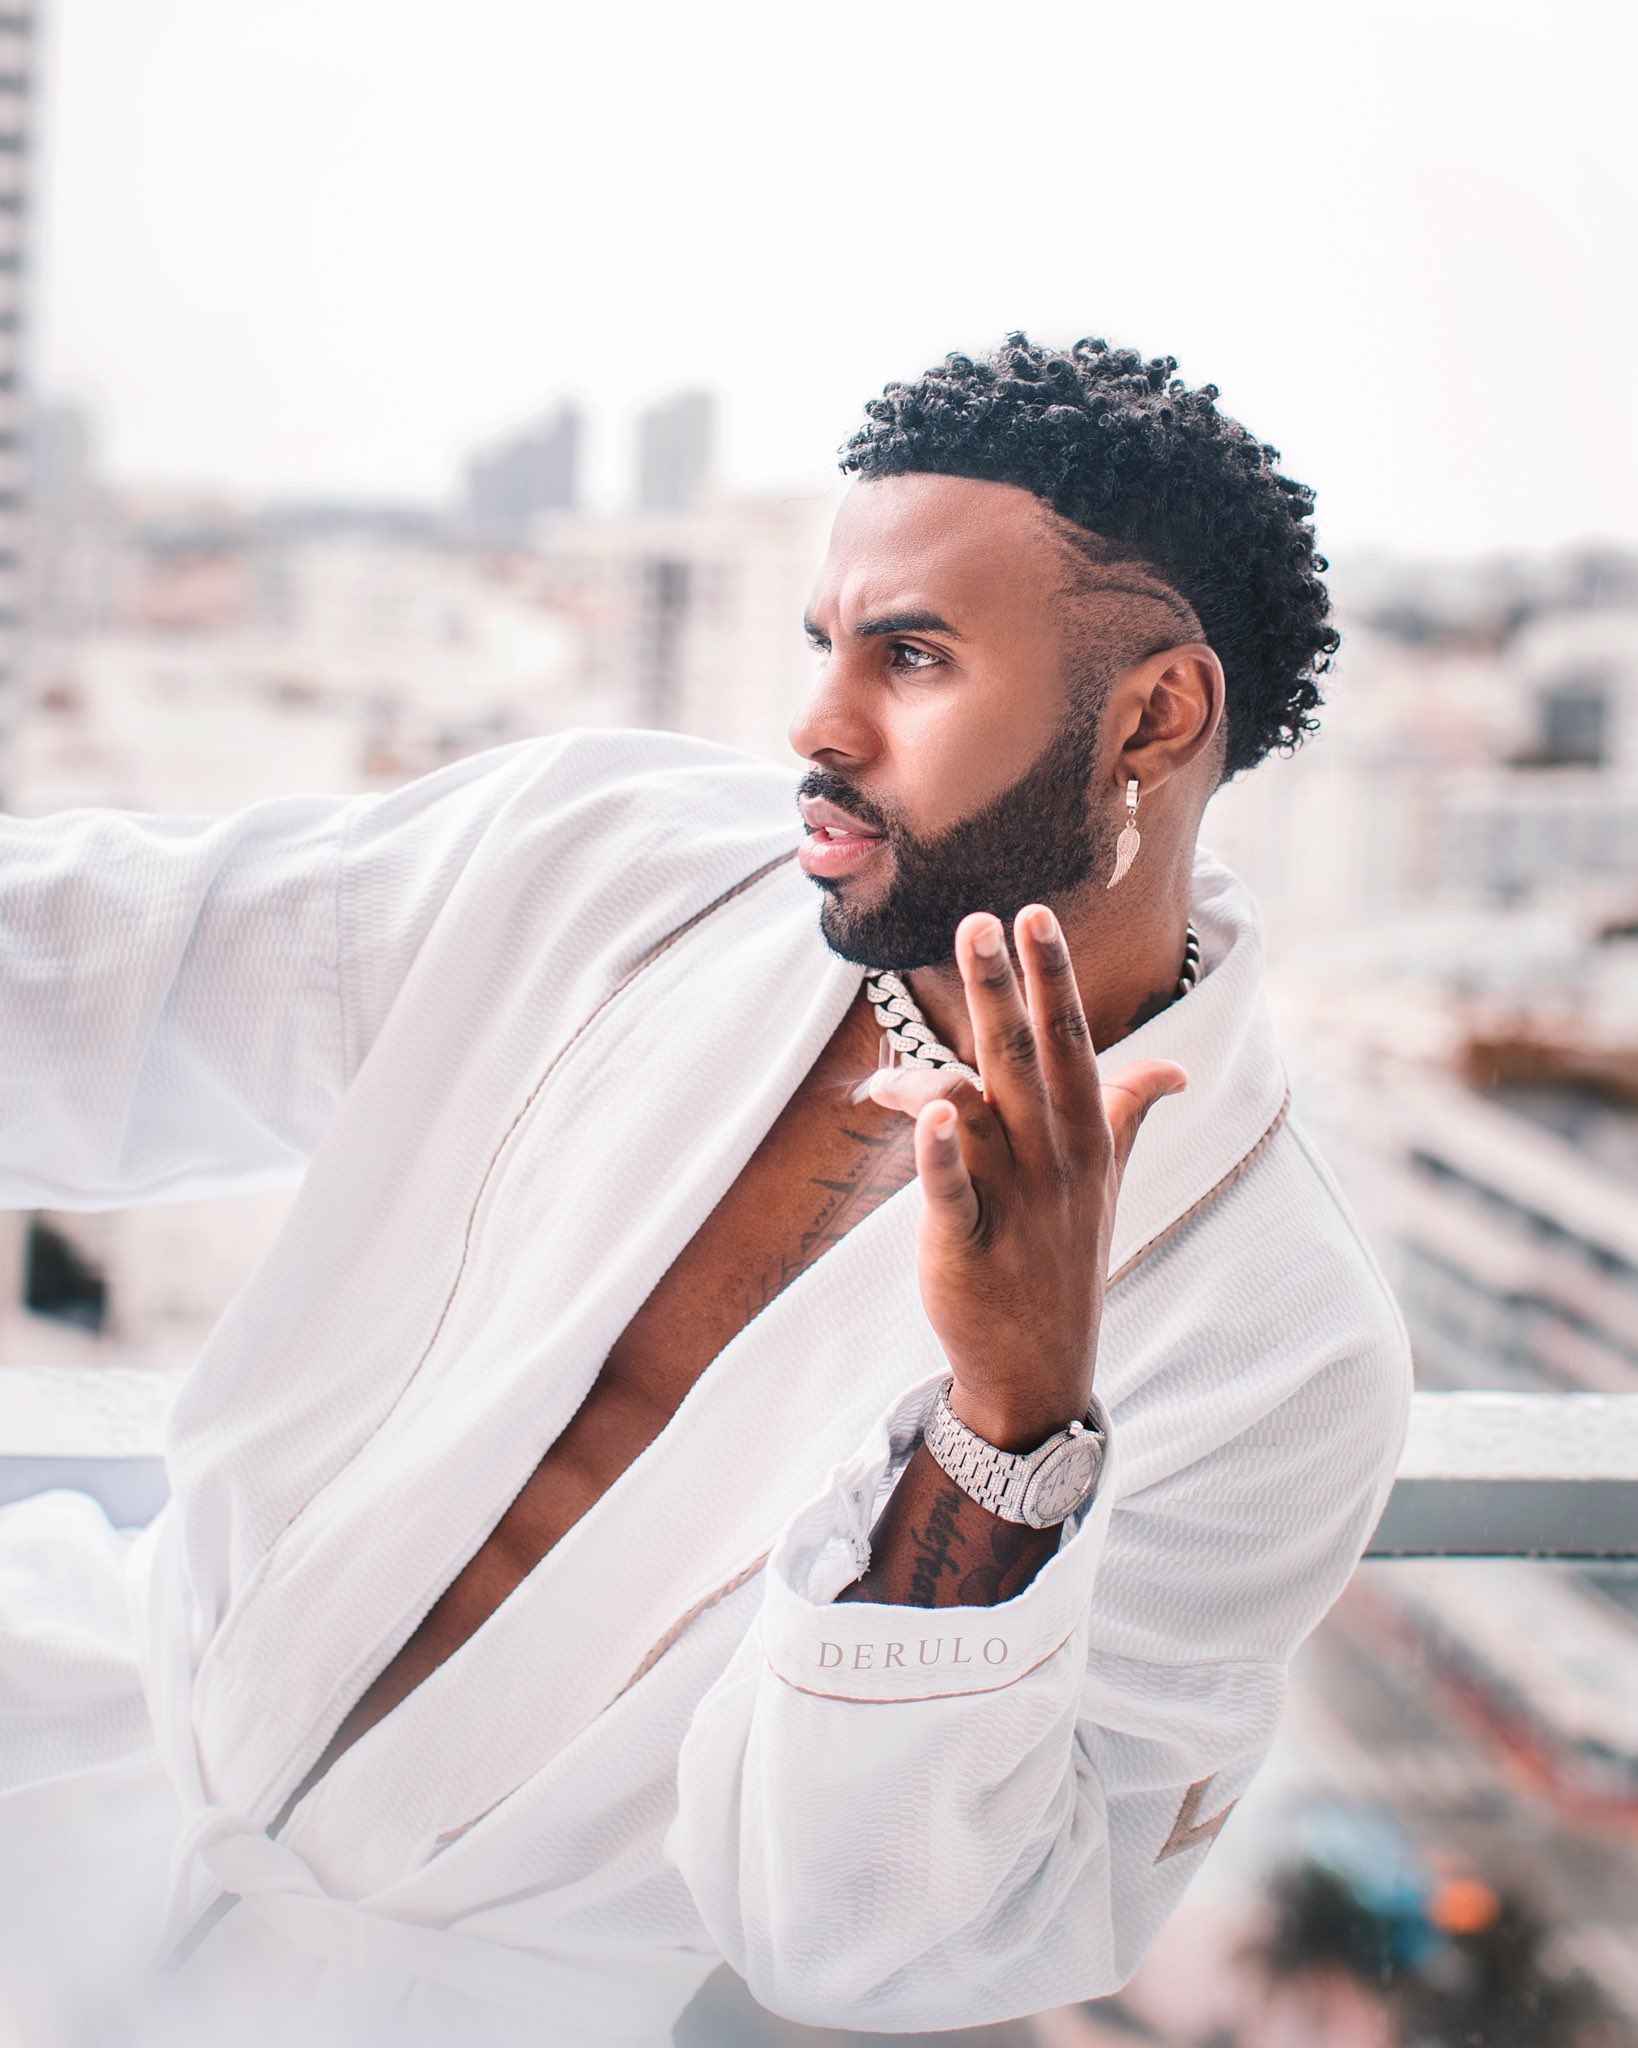 Singer Jason Derulo Invests In Clothing and Real Estate Not Wall Street   TheStreet